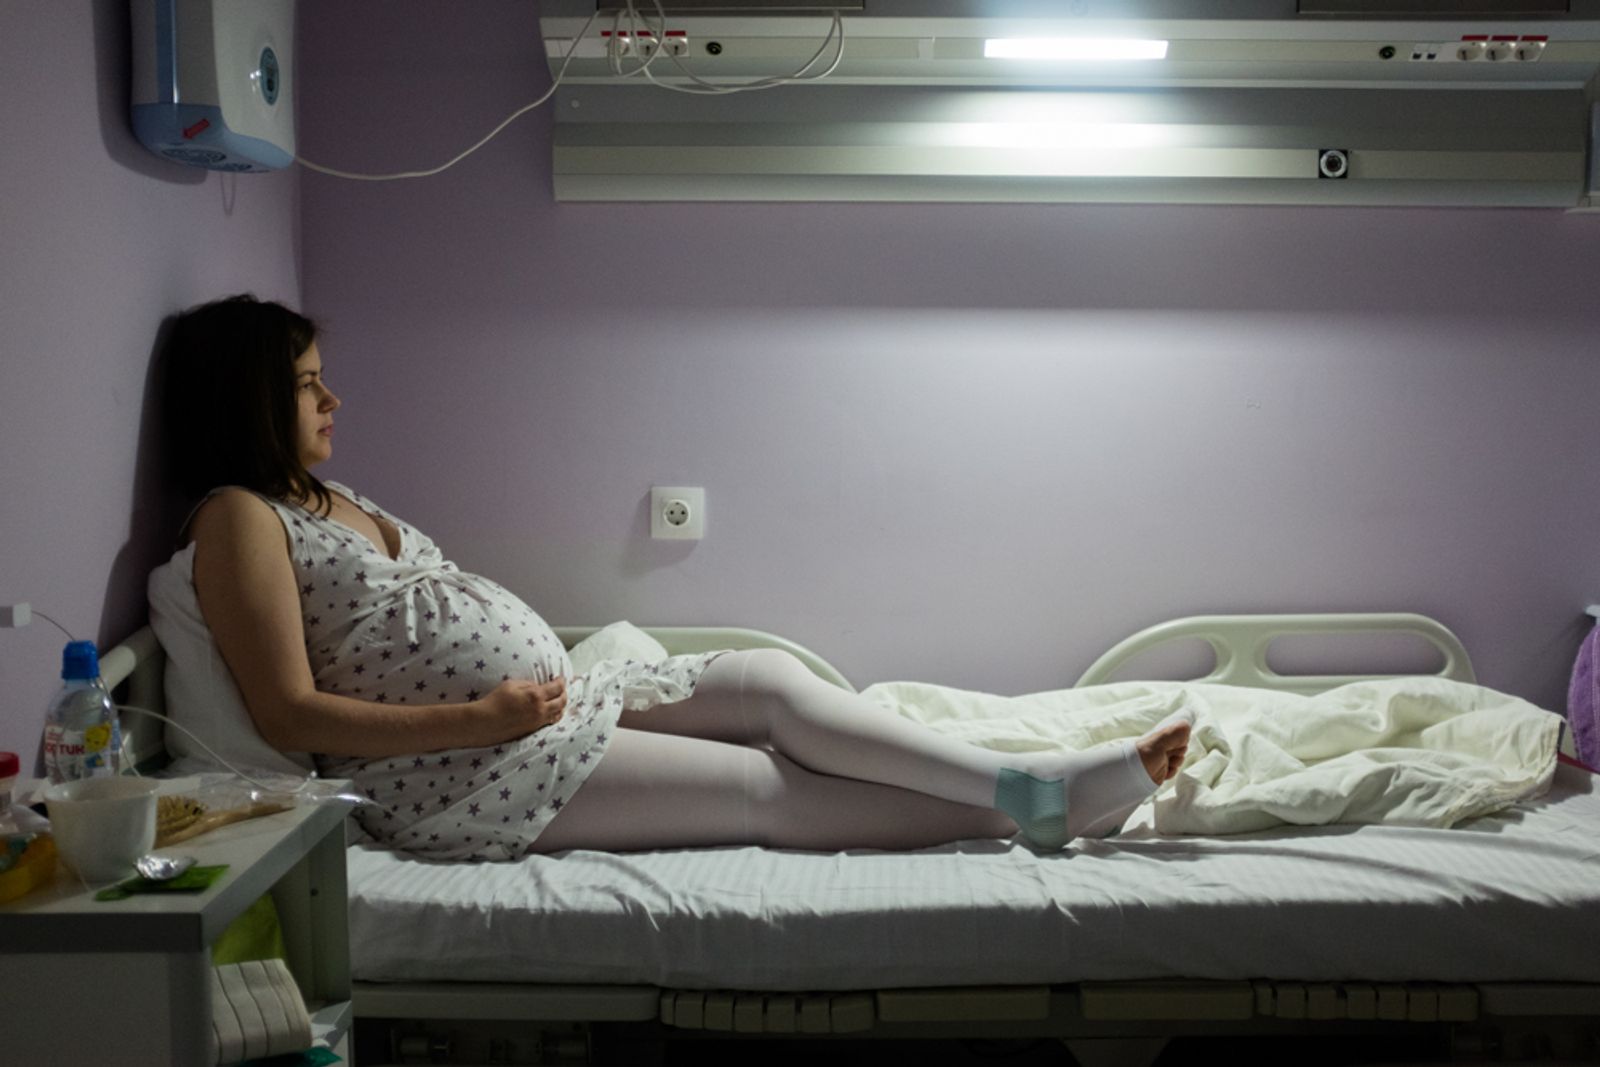 © Alyona Kochetkova - Image from the Right to give birth photography project